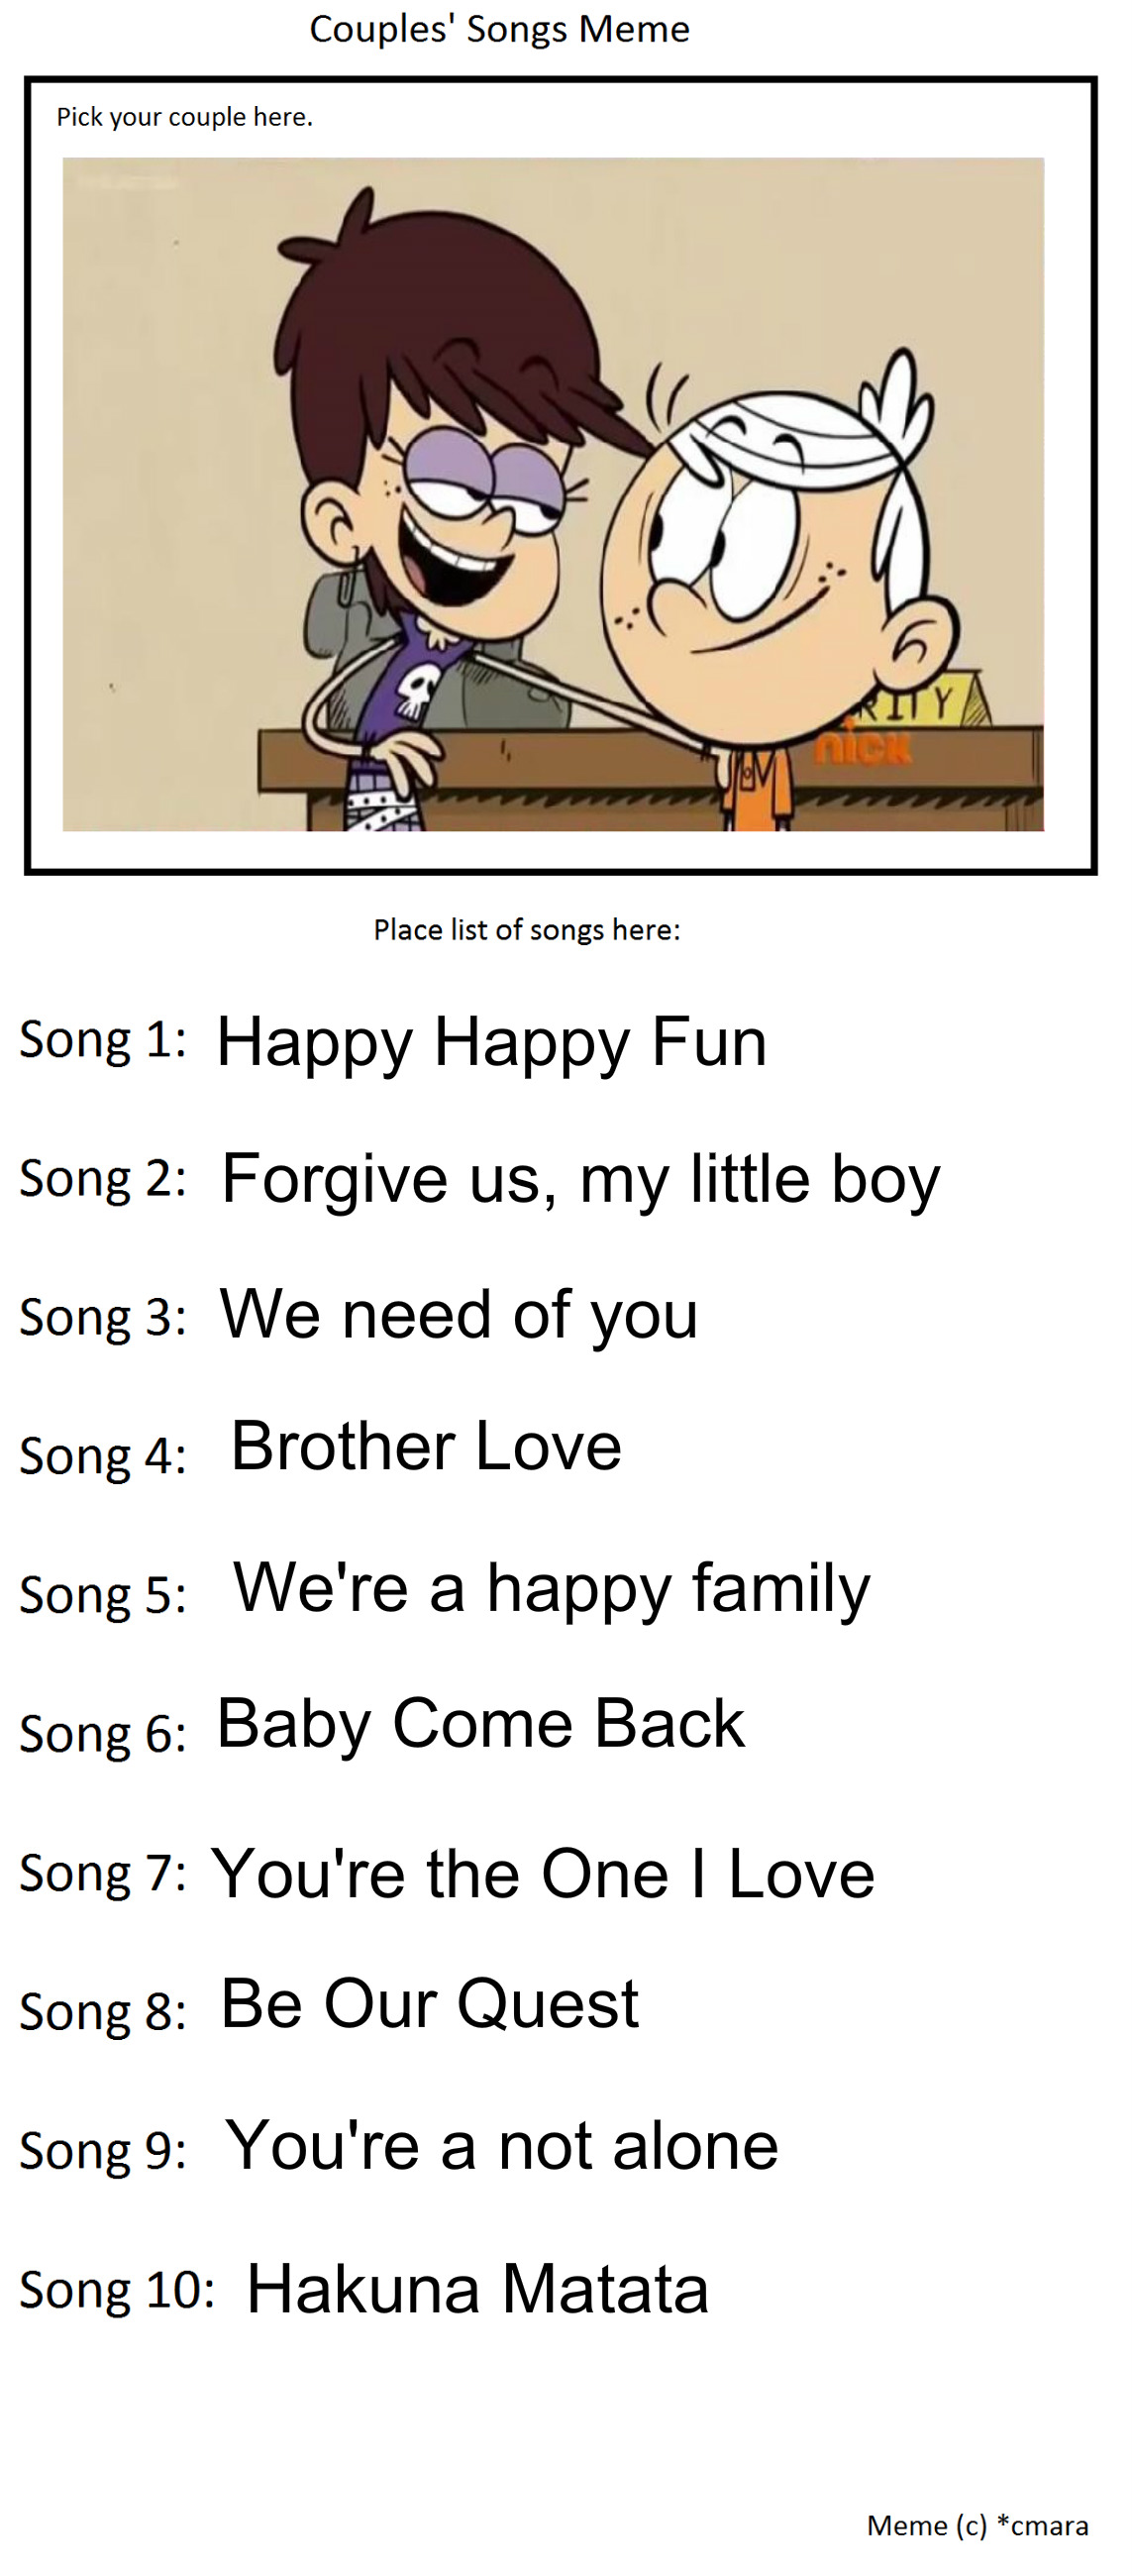 Couple's Songs Meme: Lincoln and Luna Loud by Bart-Toons on DeviantArt